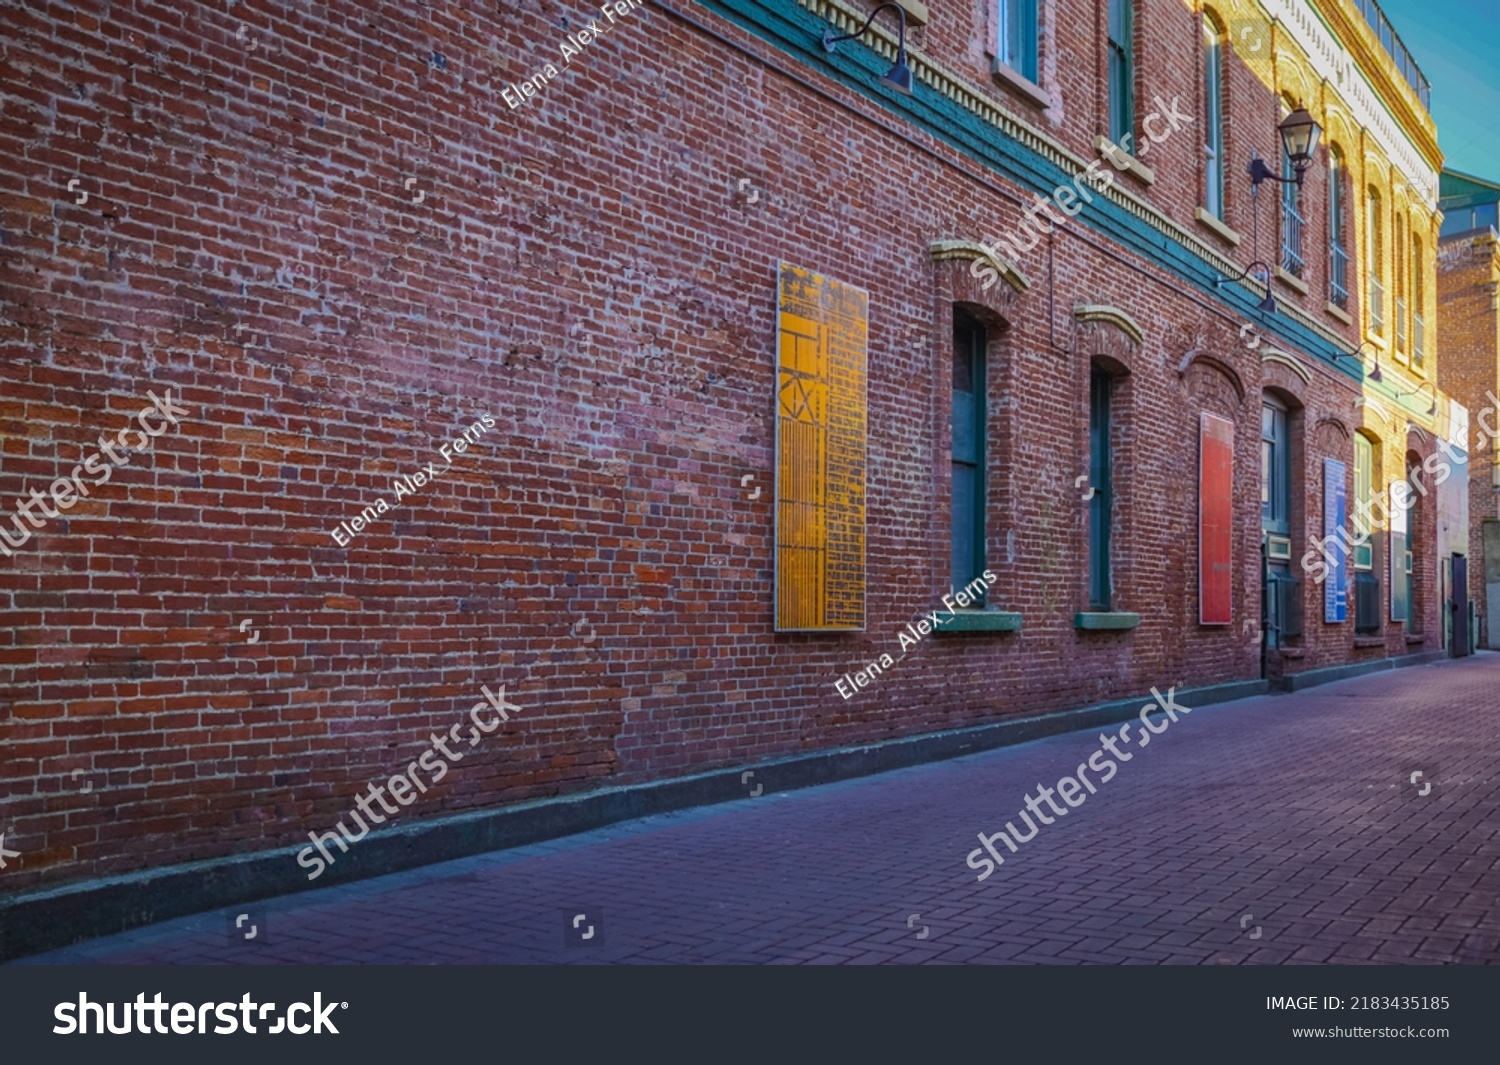 Urban Alley in old city. Old grunge street. Grungy urban background of a brick wall with windows. Travel photo, nobody, copy space for text #2183435185